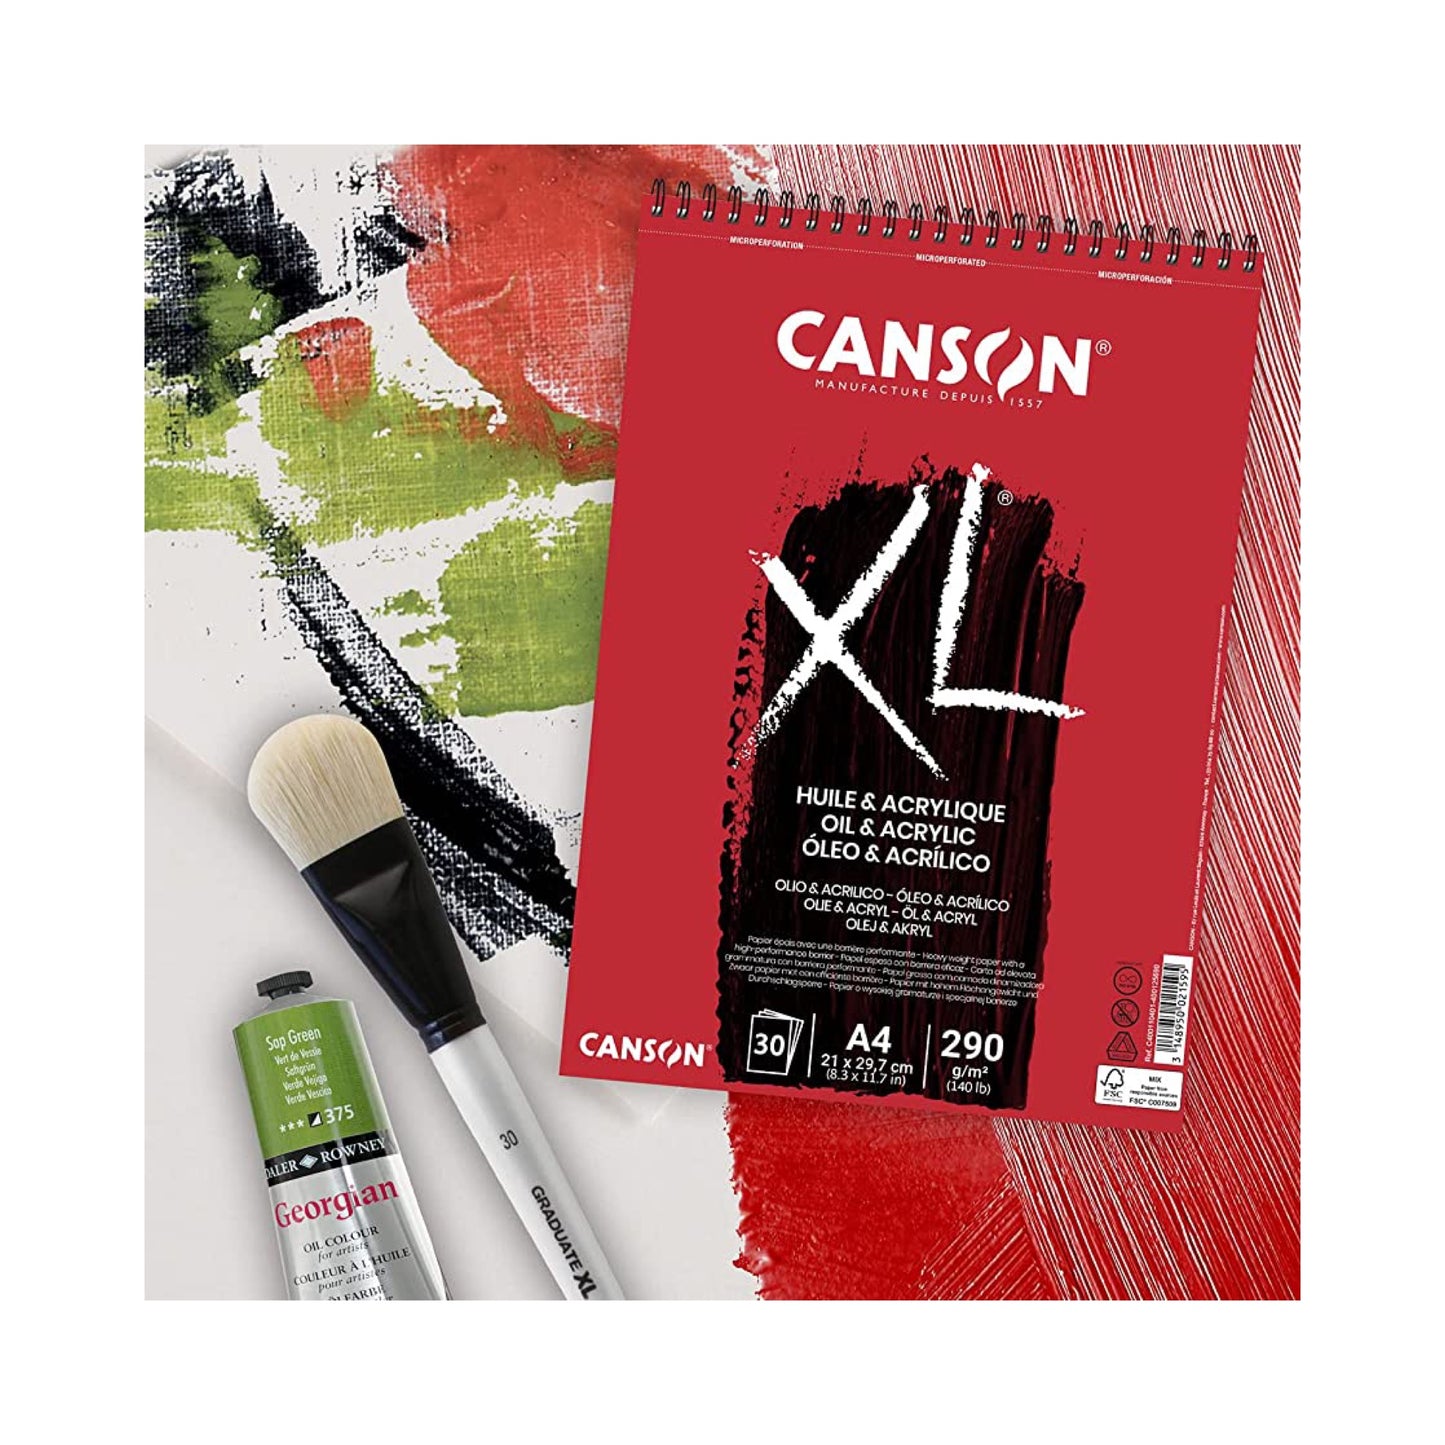 CANSON XL® Acrylic and Oil Paper Pad 290 gm A4 || دفتر رسم كانسون للاكريلك والزيتي 290 جم A4